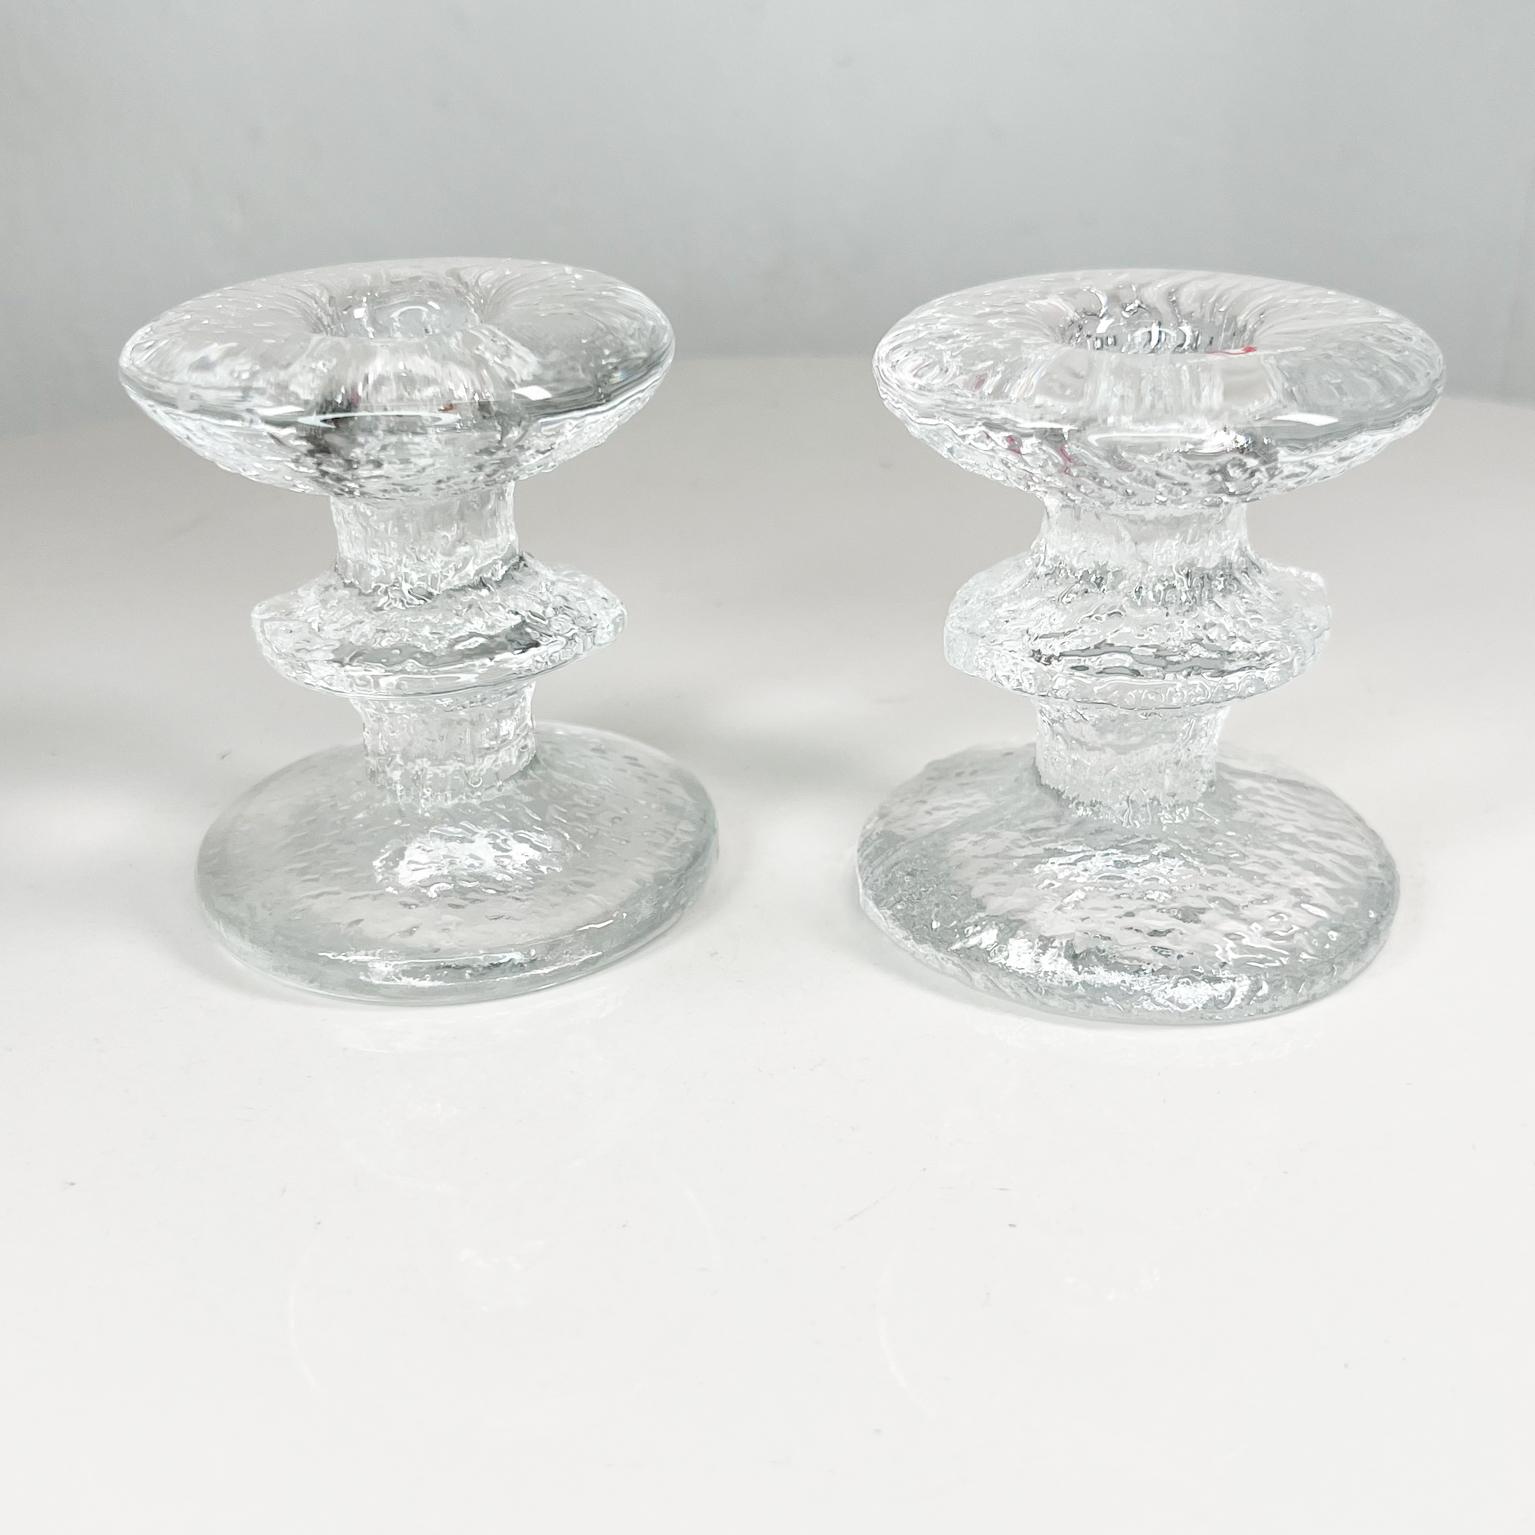 Mid-20th Century 1967 Festivo Ring Art Glass Candle Holders by Timo Sarpaneva Finland For Sale